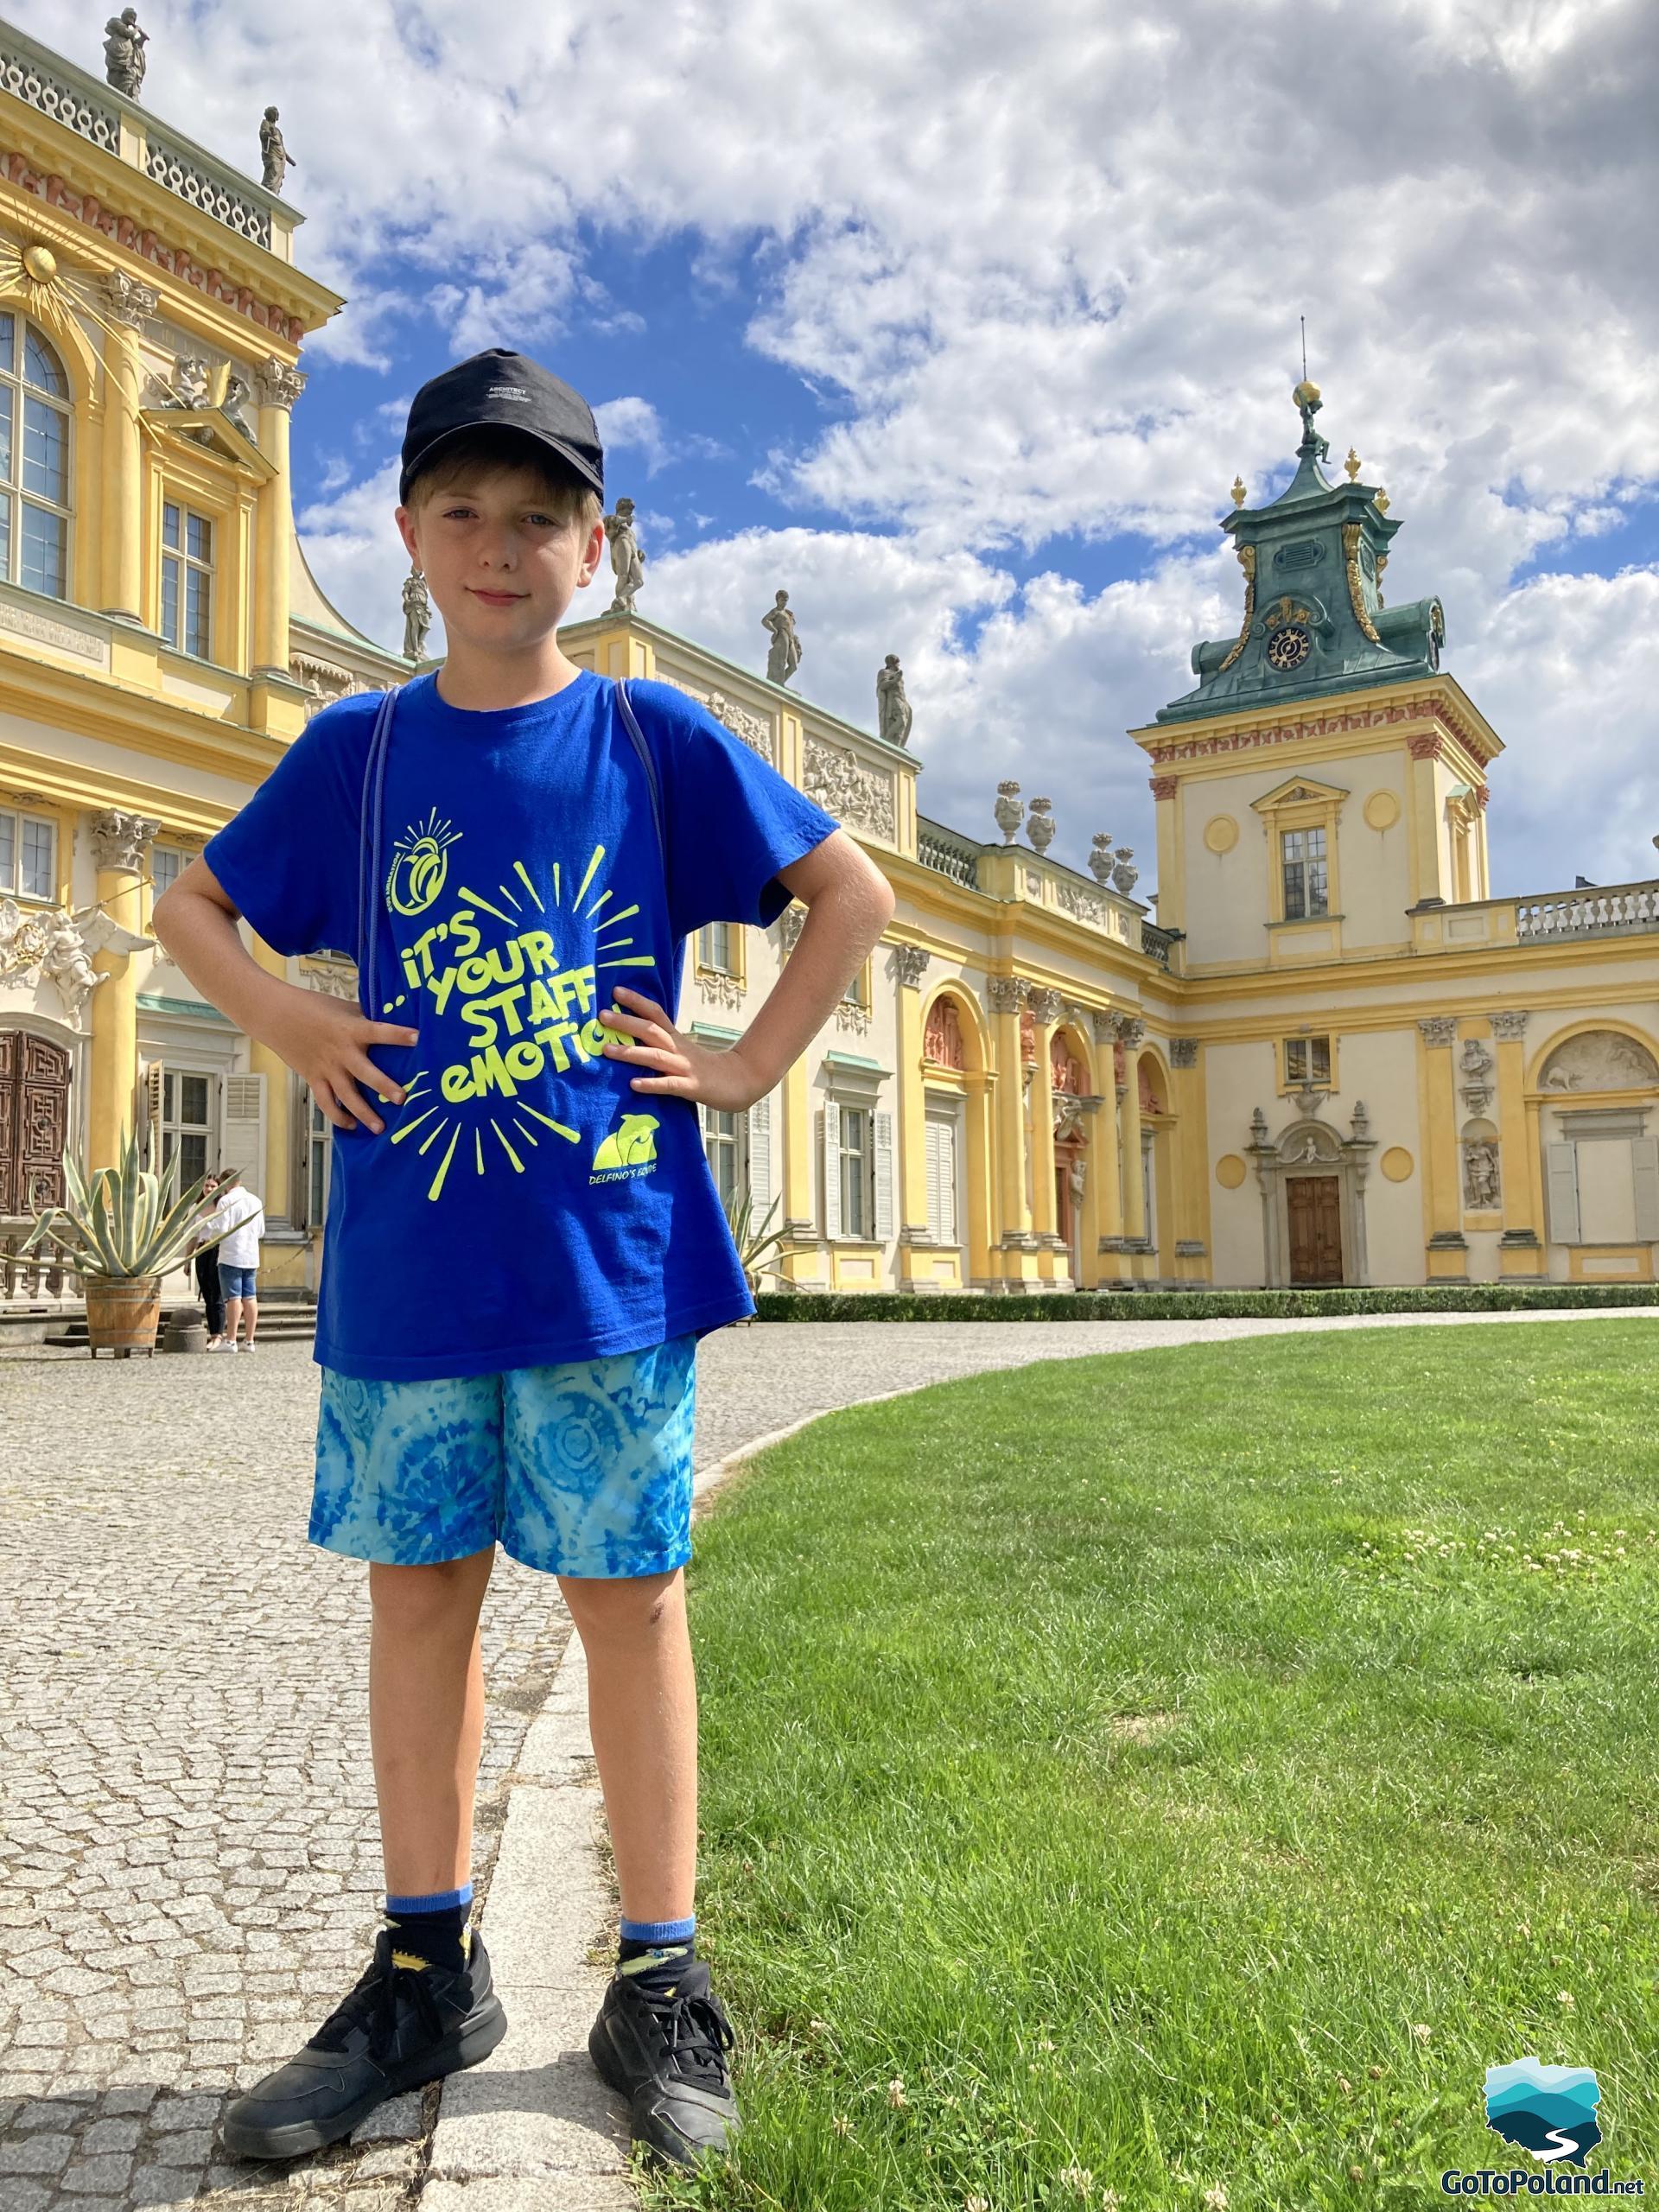 a boy is standing in front of a palace with a yellow facade